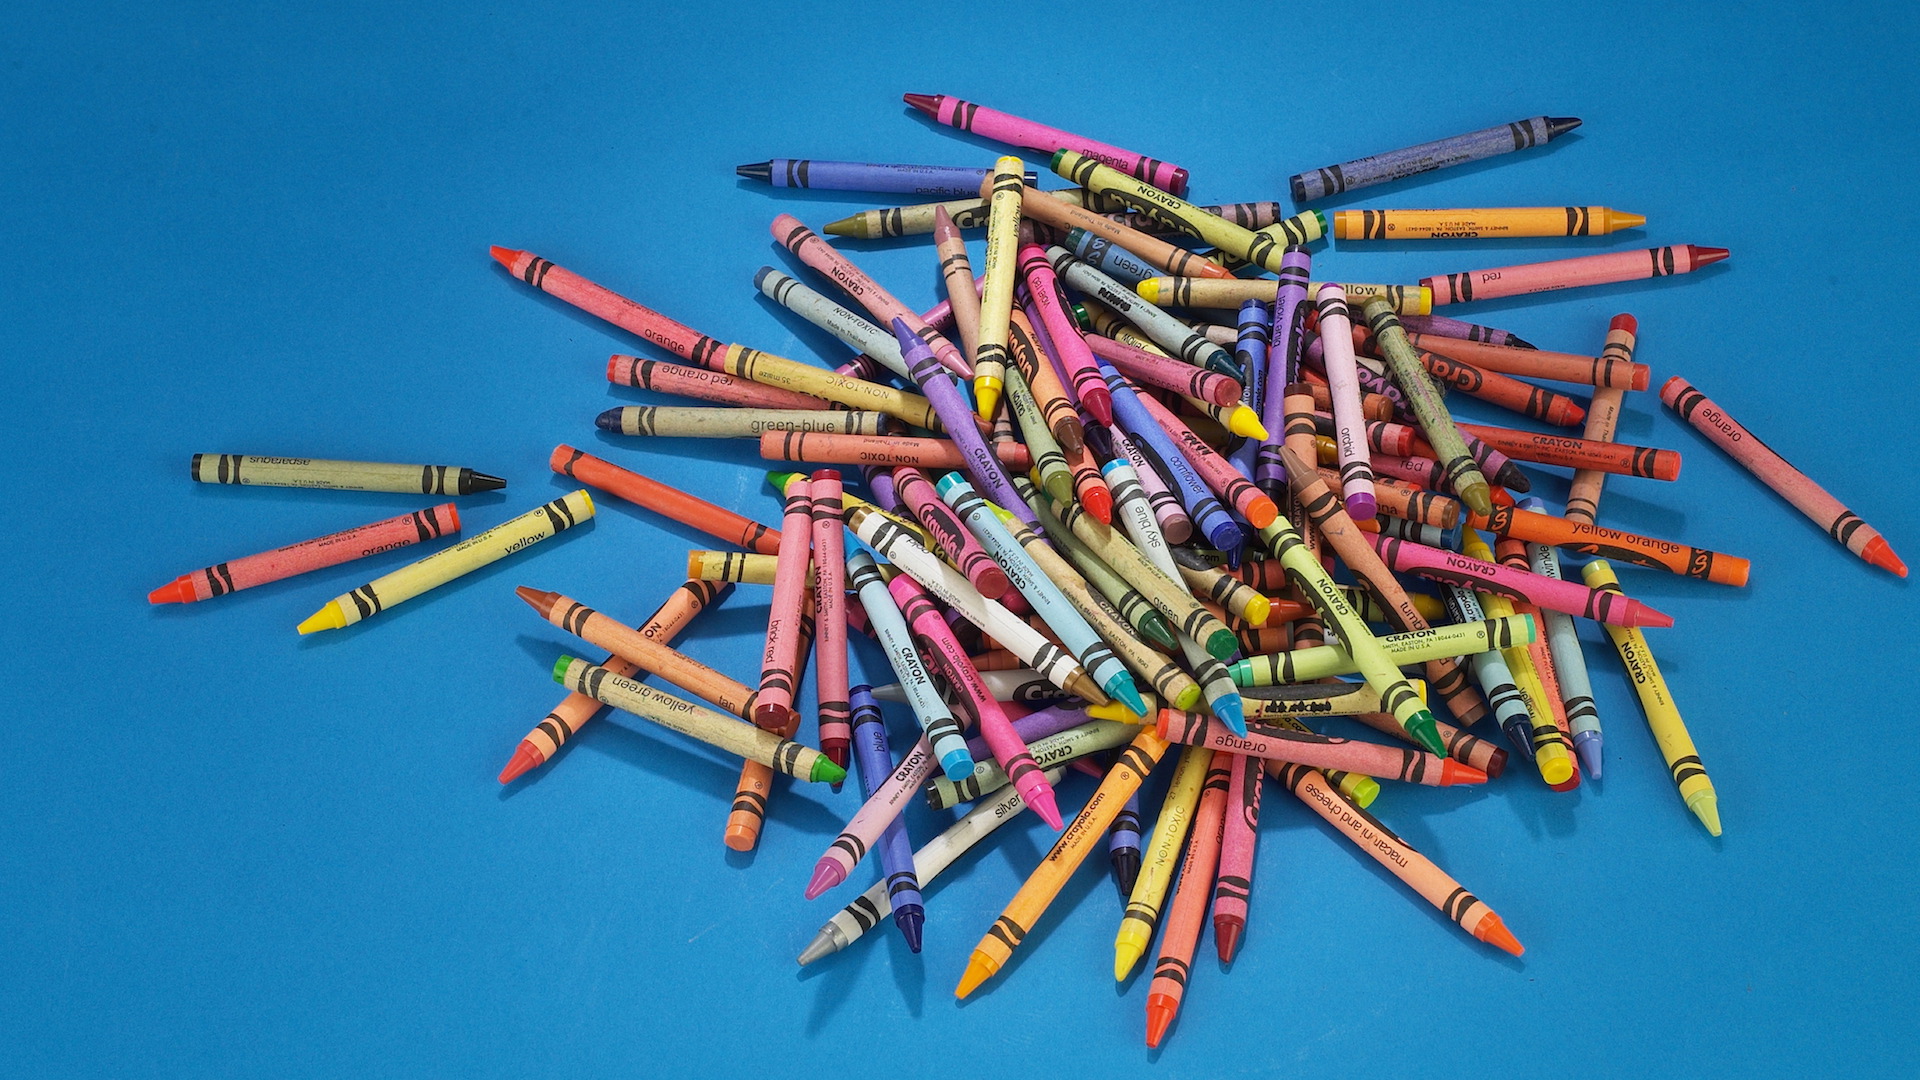 Fans campaign to have Crayola crayon named after Nipsey Hussle